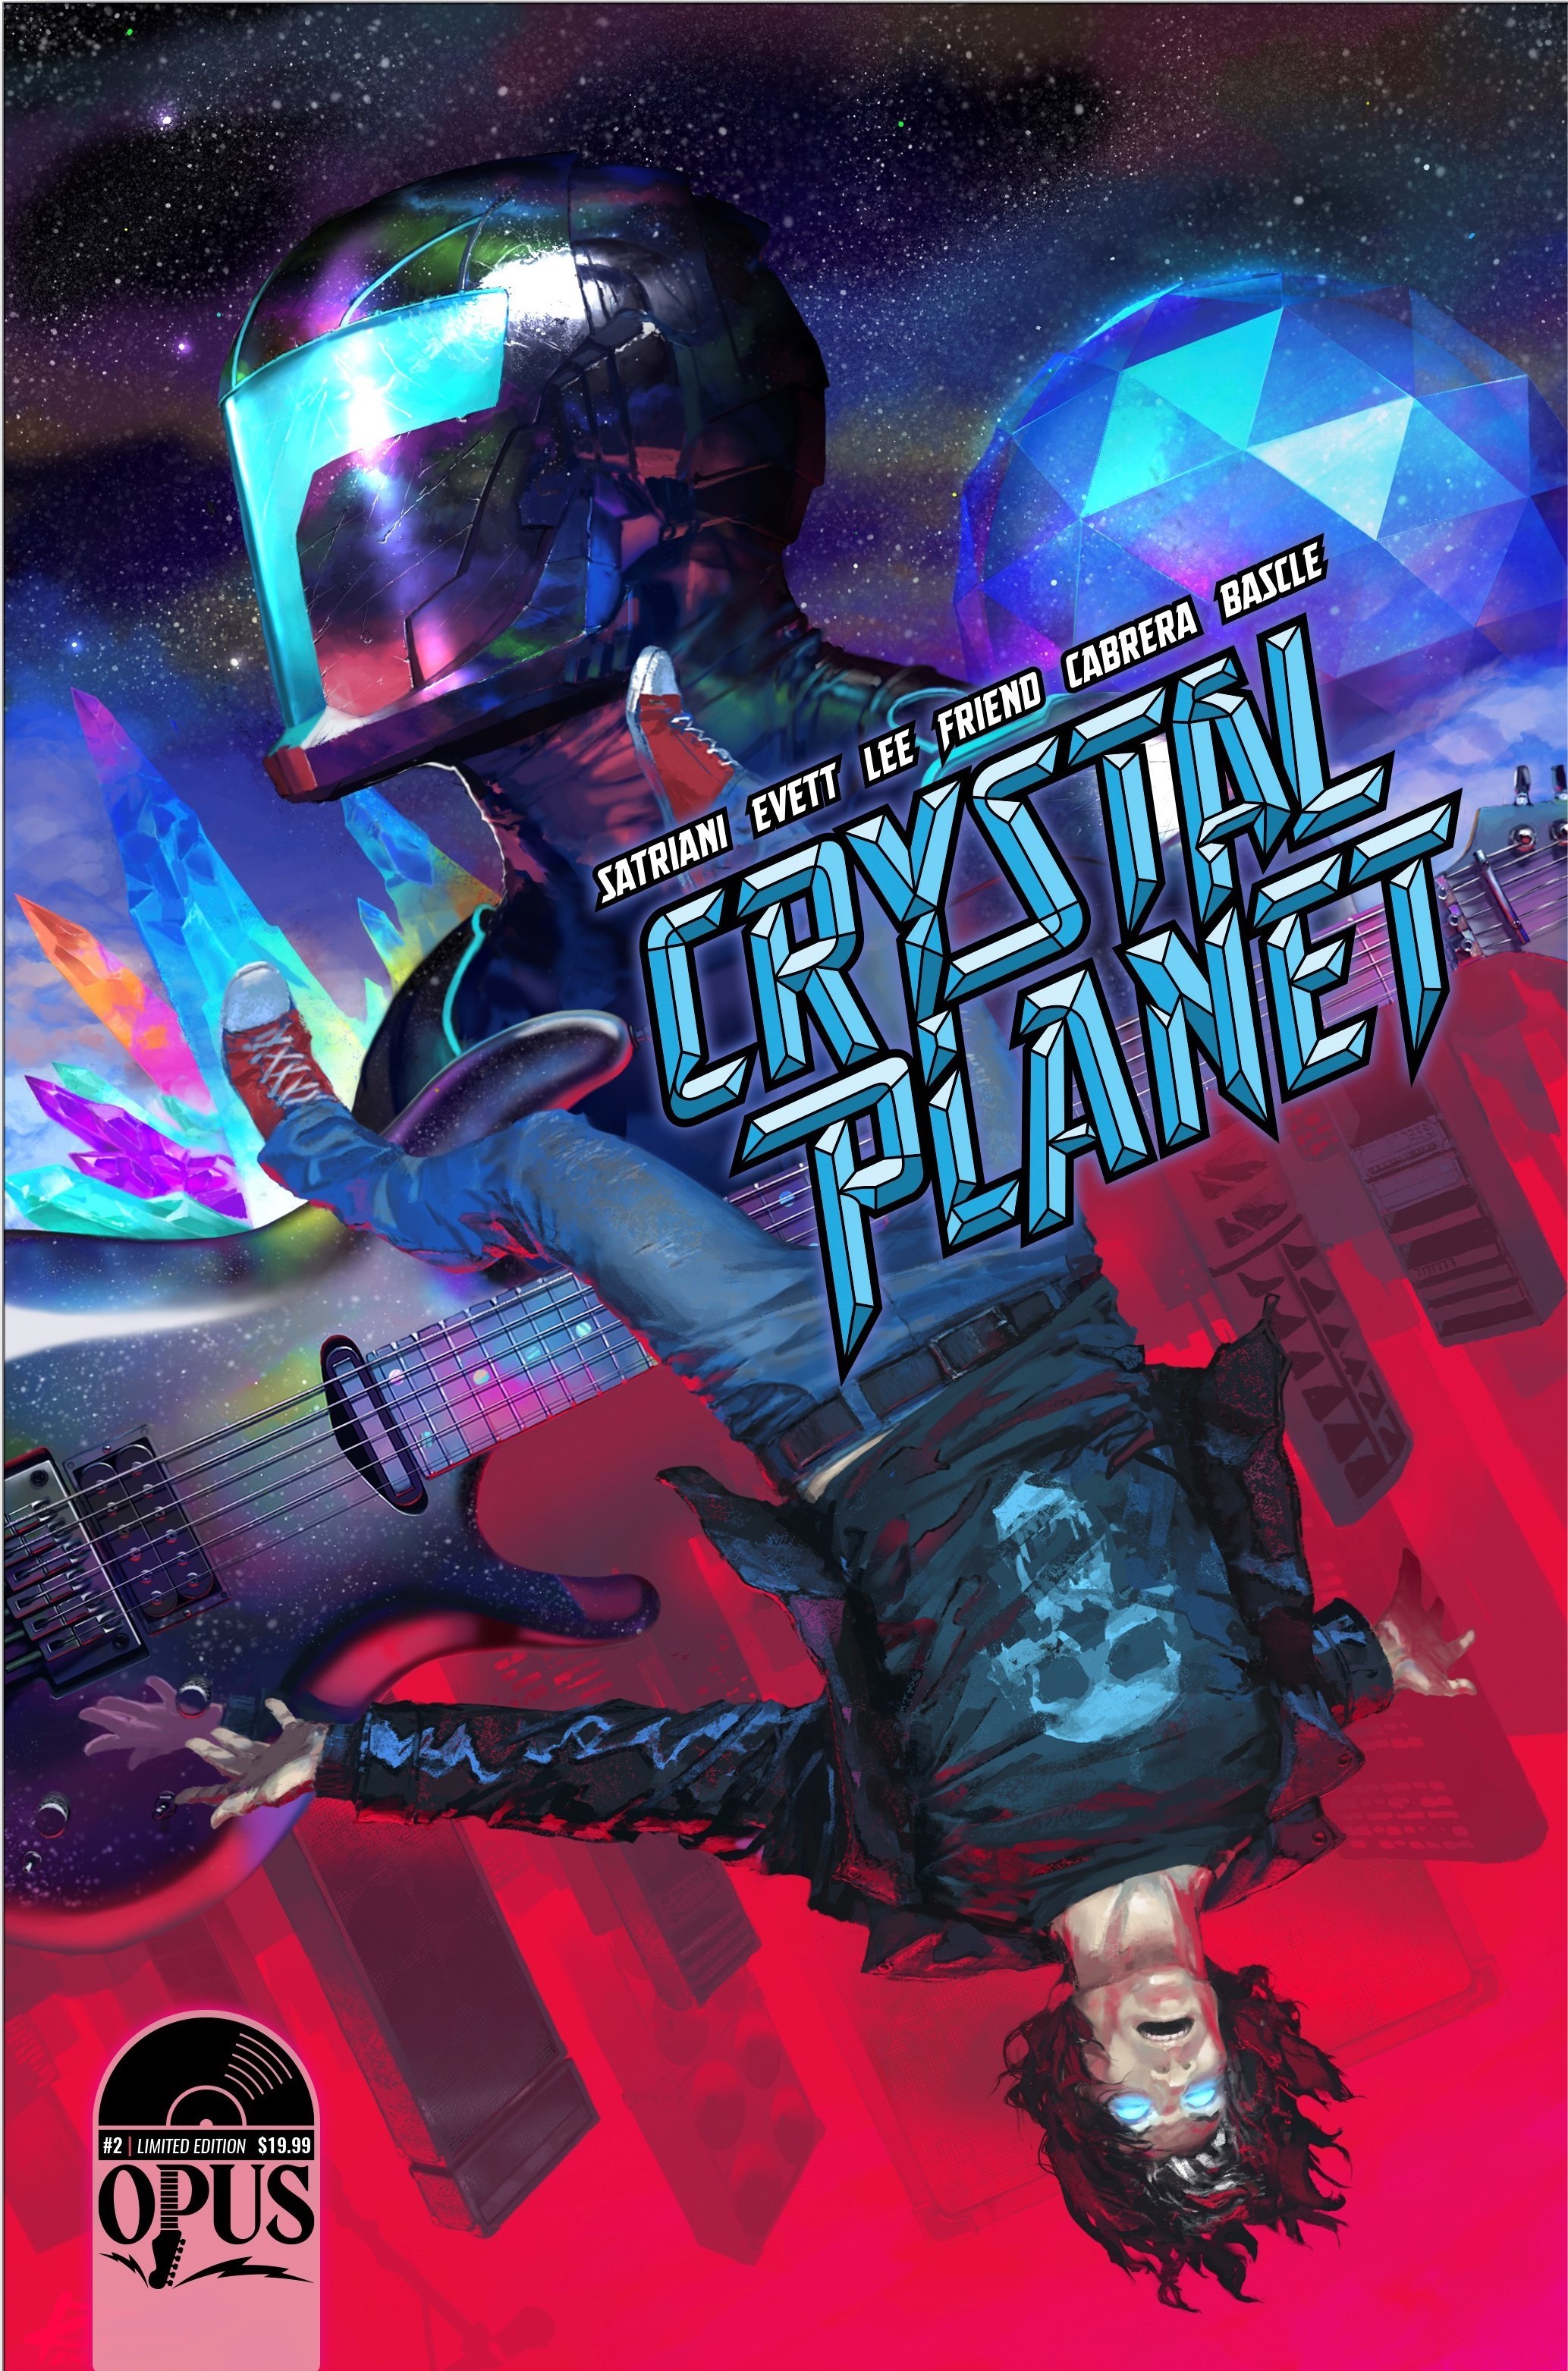 JOE SATRIANI’s ‘Crystal Planet’ Comic Book Set to Release Issue #2